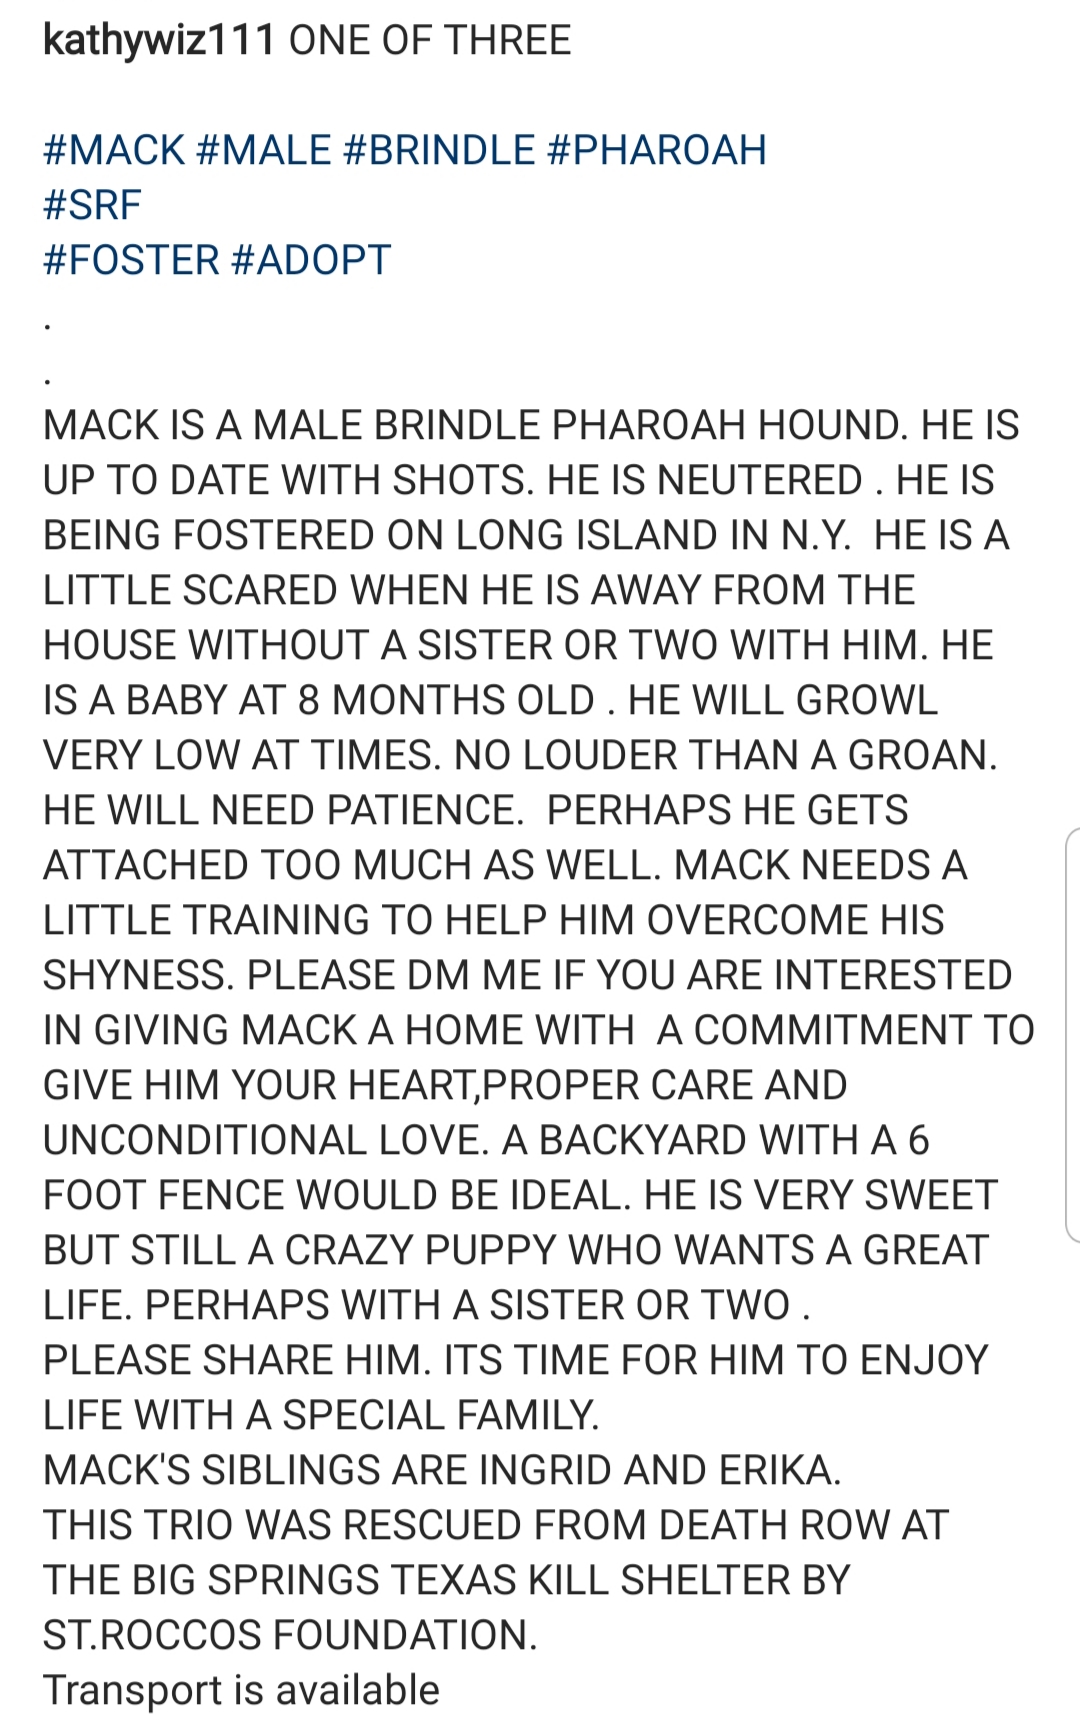 Mack Big Springs Foster Adopt Dog Rescue St Rocco Foundation Post